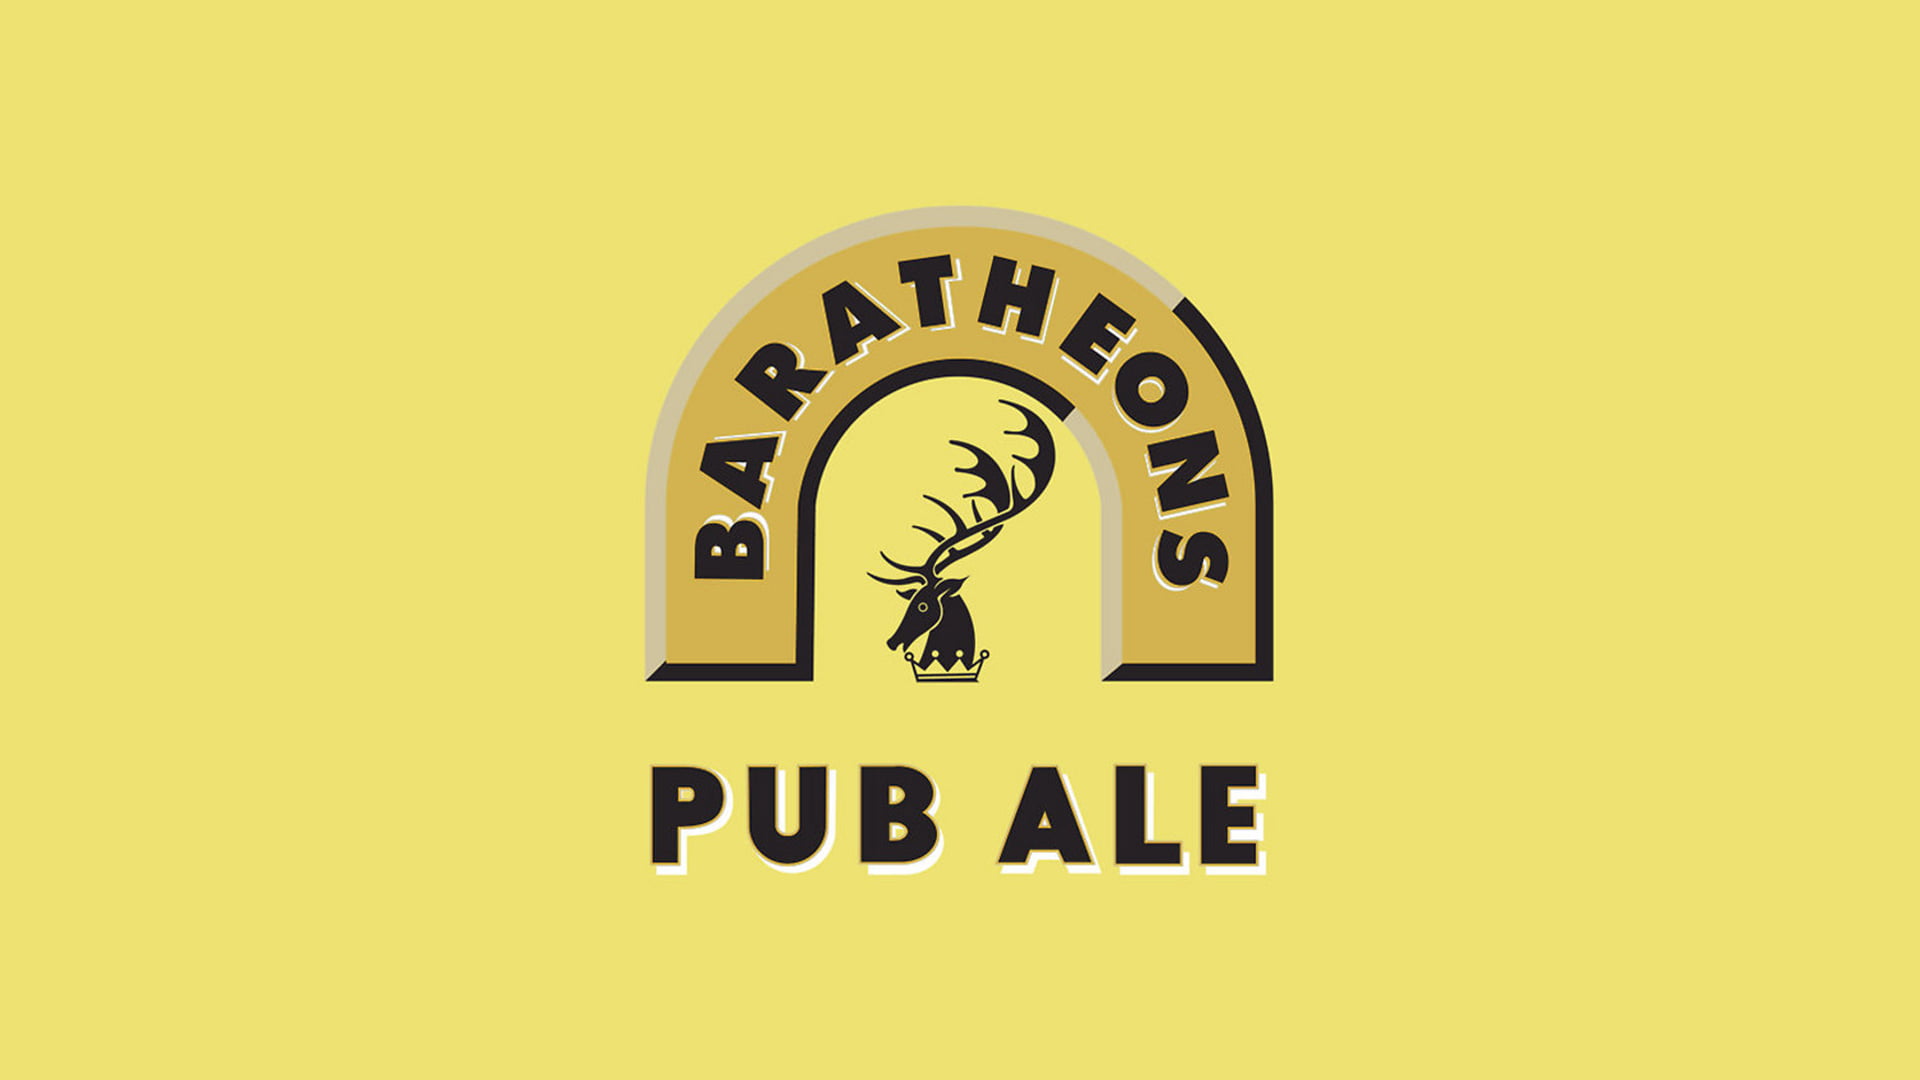 Baratheons Pub Ale logo, House Baratheon, Game of Thrones, A Song of Ice and Fire, beer